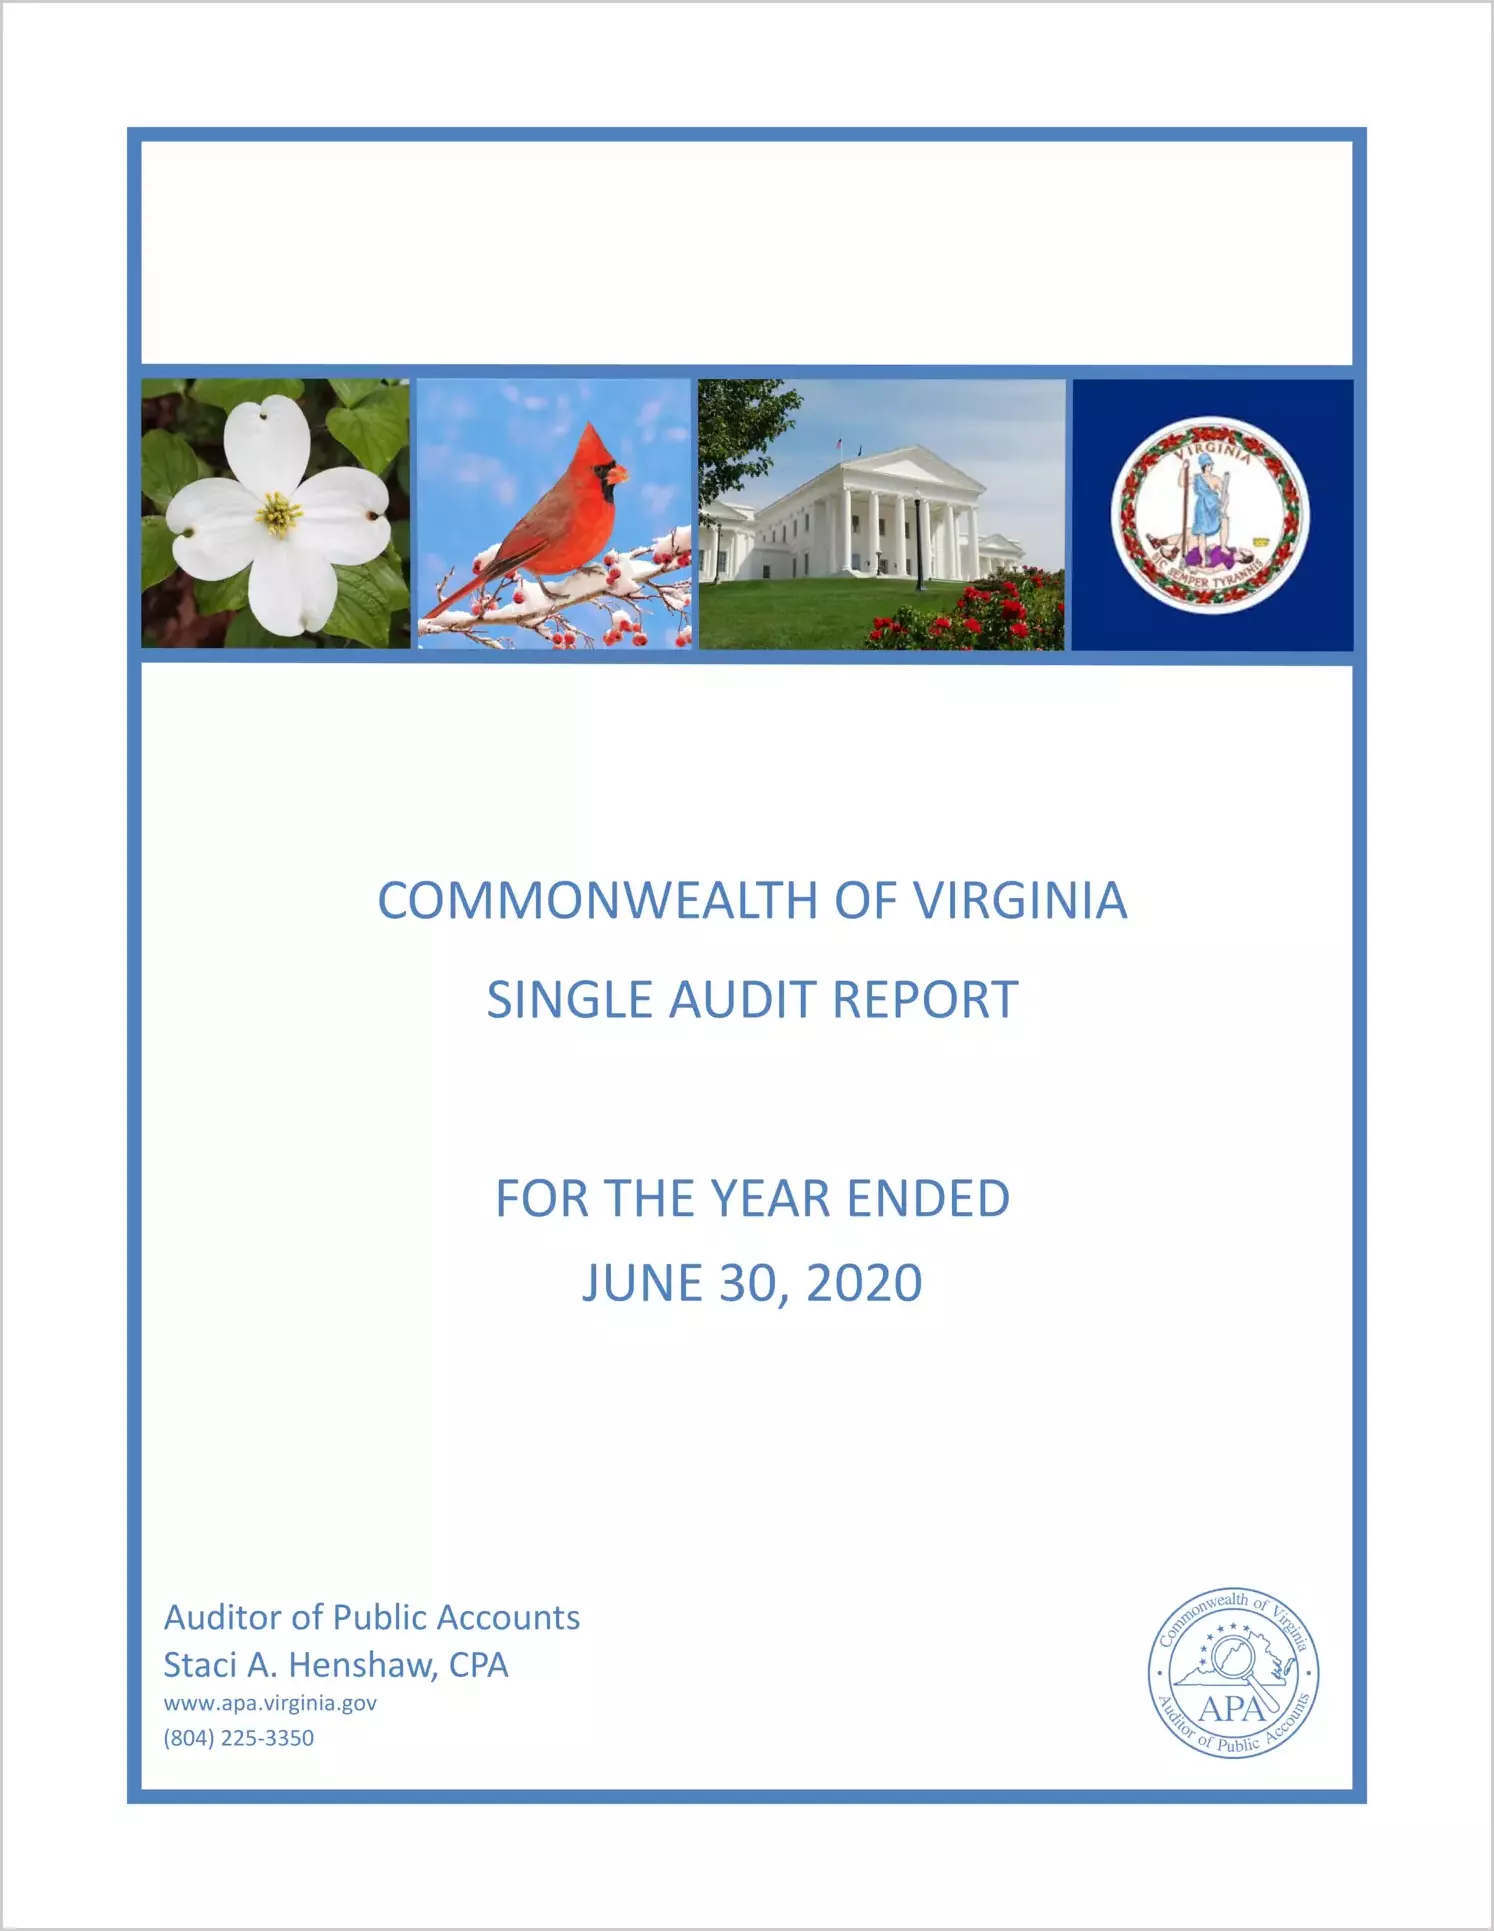 Commonwealth of Virginia Single Audit Report for the Year Ended June 30, 2020